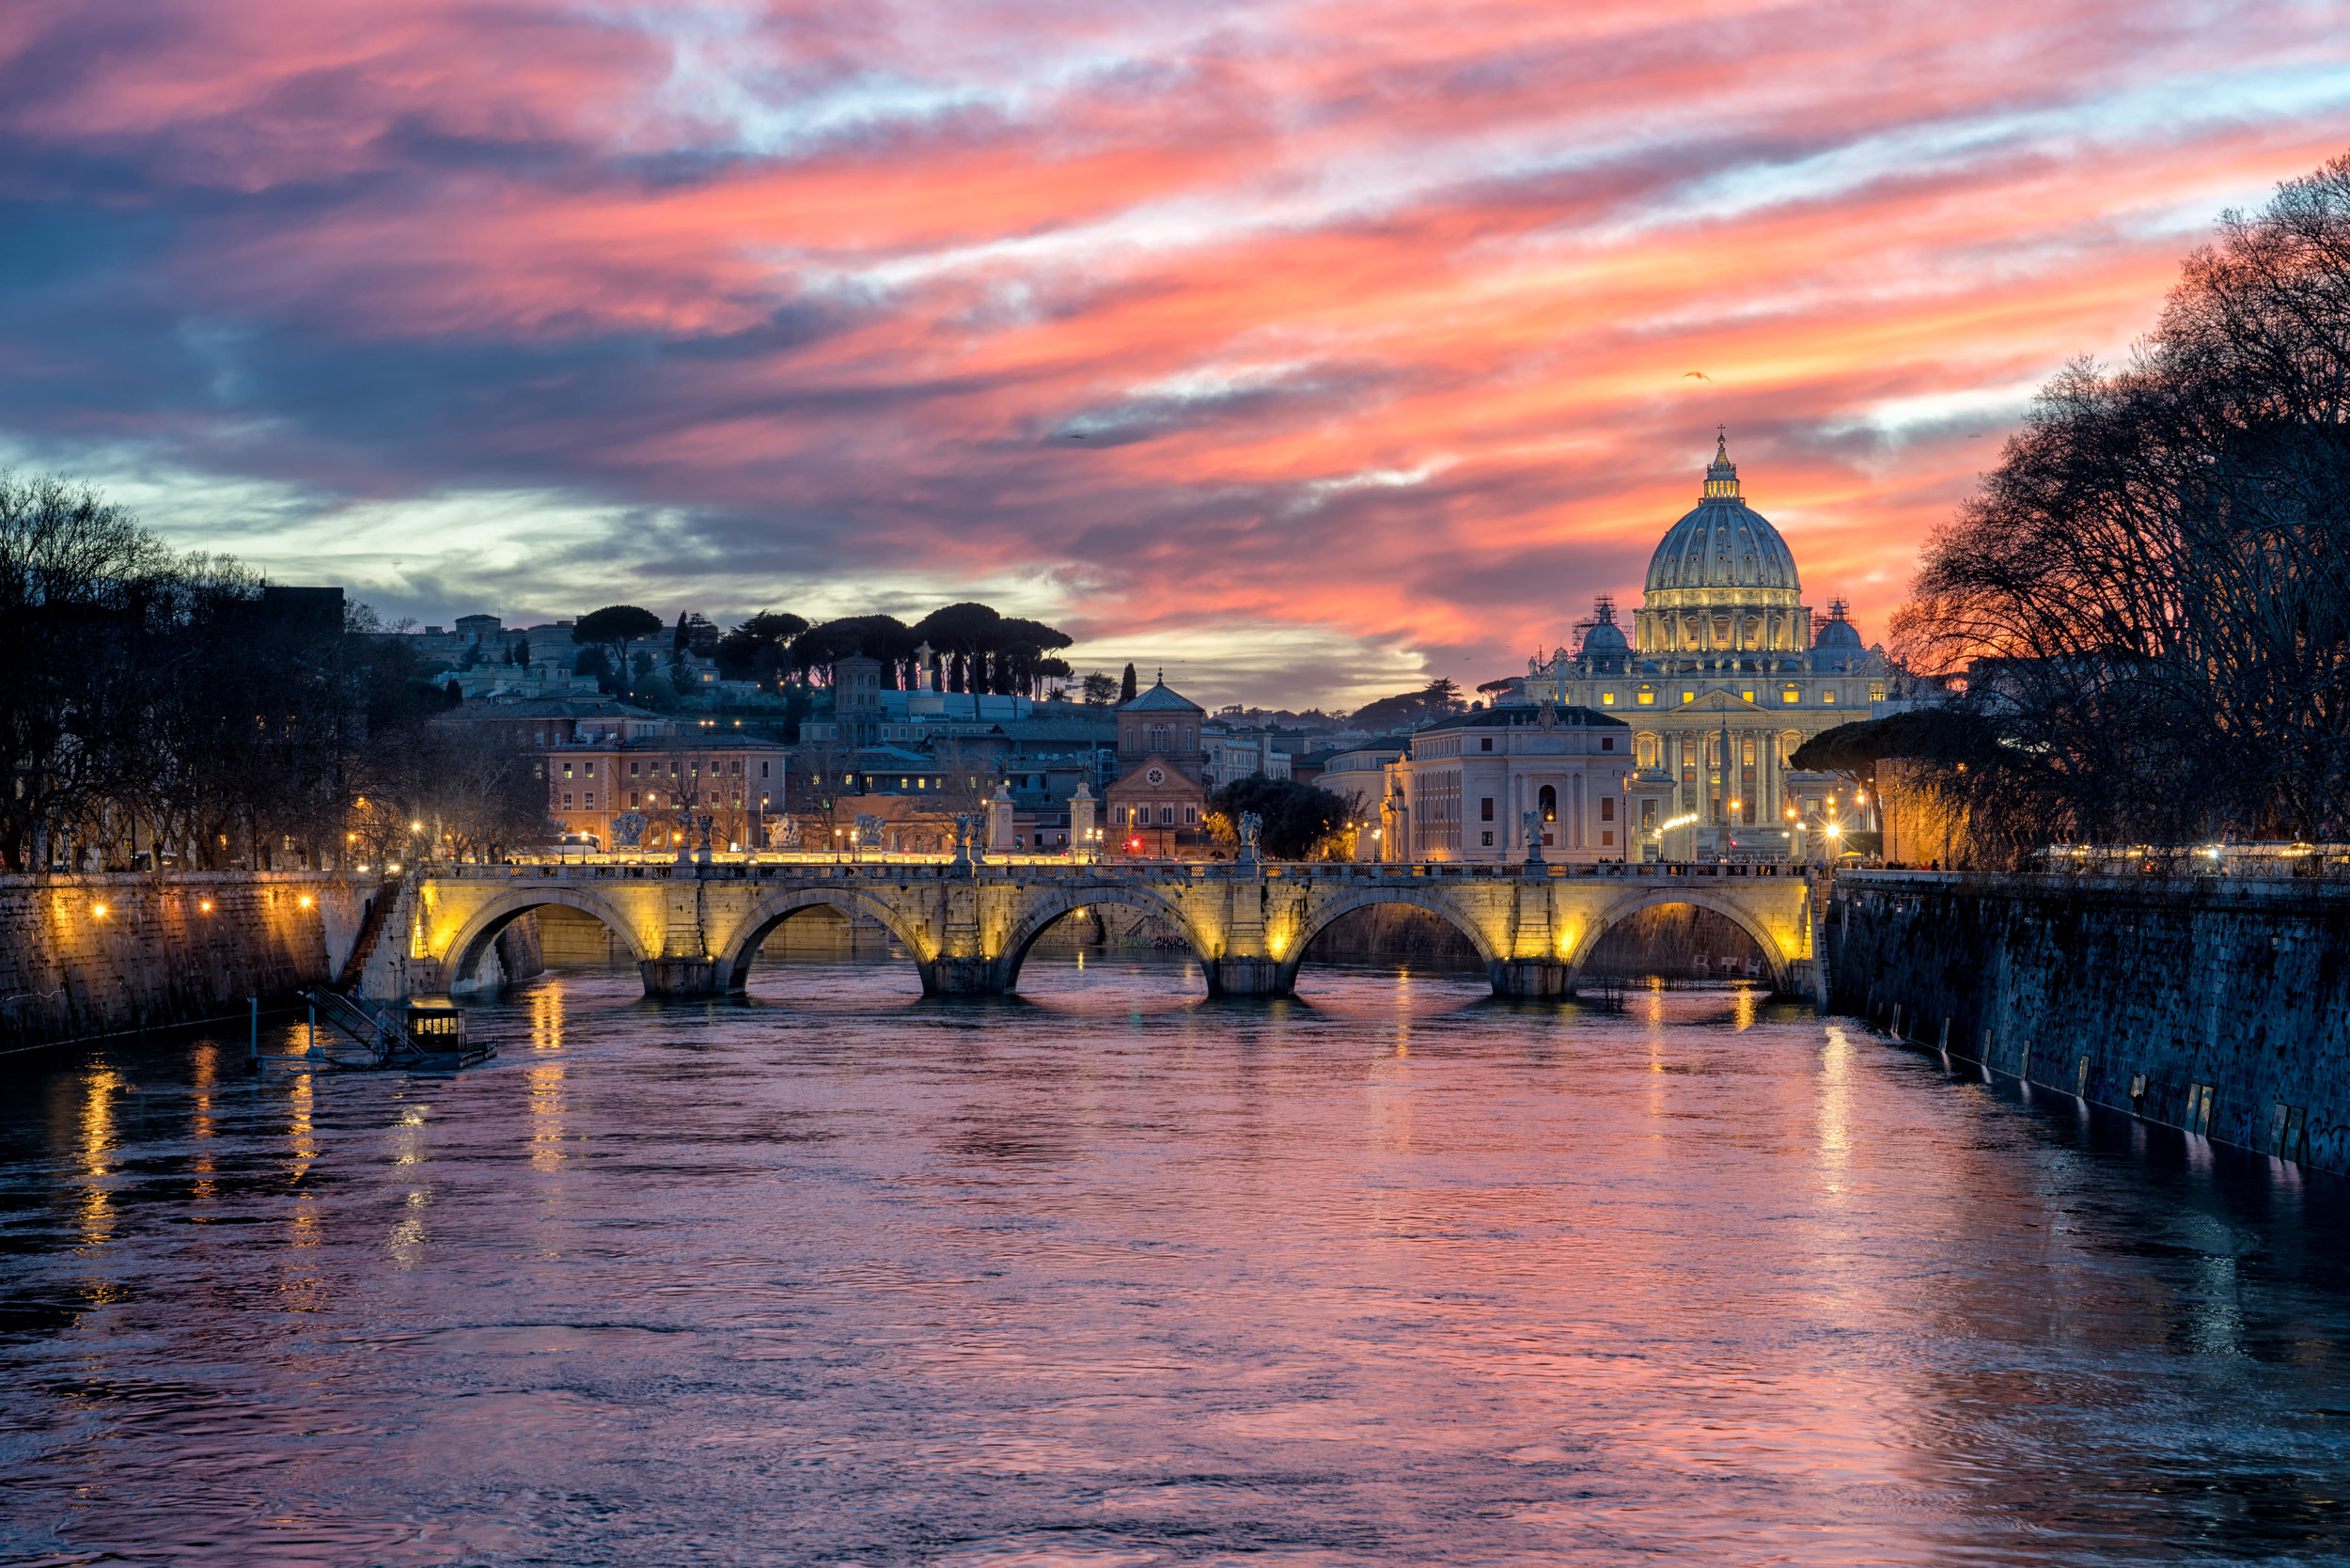 The Vatican at Sunset